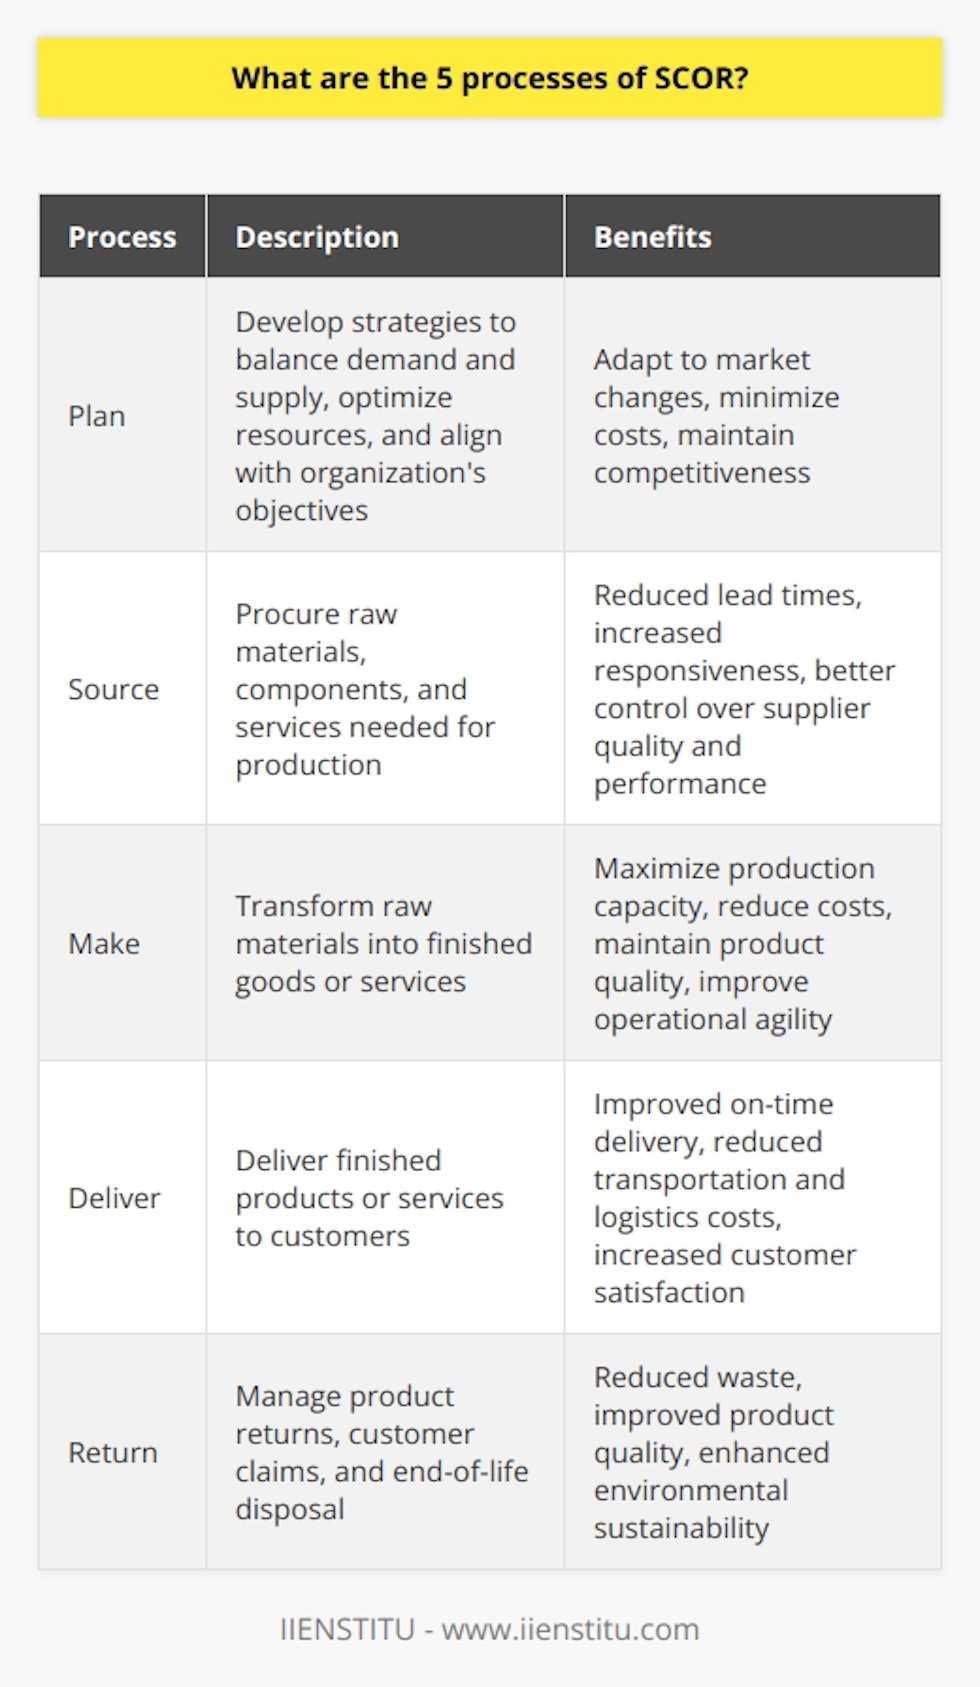 The SCOR (Supply Chain Operations Reference) framework consists of five key processes: Plan, Source, Make, Deliver, and Return. These processes work together to streamline and enhance supply chain operations, ultimately leading to improved efficiency and profitability.The first process, Plan, involves developing strategies to balance demand and supply, optimize resources, and align with the organization's objectives. This includes activities such as demand forecasting, production planning, inventory management, and capacity management. By effectively planning, companies can adapt to market changes, minimize costs, and maintain competitiveness.The second process, Source, focuses on procuring raw materials, components, and services needed for production. Key activities in this process include supplier management, contract negotiation, purchasing, and procurement. An optimized sourcing process can result in reduced lead times, increased responsiveness, and better control over supplier quality and performance.The Make process involves transforming raw materials into finished goods or services. This includes production processes such as assembly, processing, packaging, and quality control. Efficient manufacturing practices enable businesses to maximize production capacity, reduce costs, maintain product quality, and improve operational agility.The Deliver process encompasses all the steps involved in delivering finished products or services to customers. This includes order management, transportation, warehousing, and fulfillment. By optimizing the delivery process, organizations can improve on-time delivery, reduce transportation and logistics costs, increase customer satisfaction, and streamline overall supply chain operations.The final process, Return, involves managing product returns, customer claims, and end-of-life disposal. It is crucial for organizations to have effective return policies and procedures in place to handle reverse logistics and maintain customer satisfaction. Proper returns management can result in reduced waste, improved product quality, and enhanced environmental sustainability.In summary, the five processes of SCOR provide a comprehensive framework for managing and optimizing supply chain operations. By implementing these processes, organizations can drive improvements in efficiency, customer satisfaction, and profitability within their supply chains.